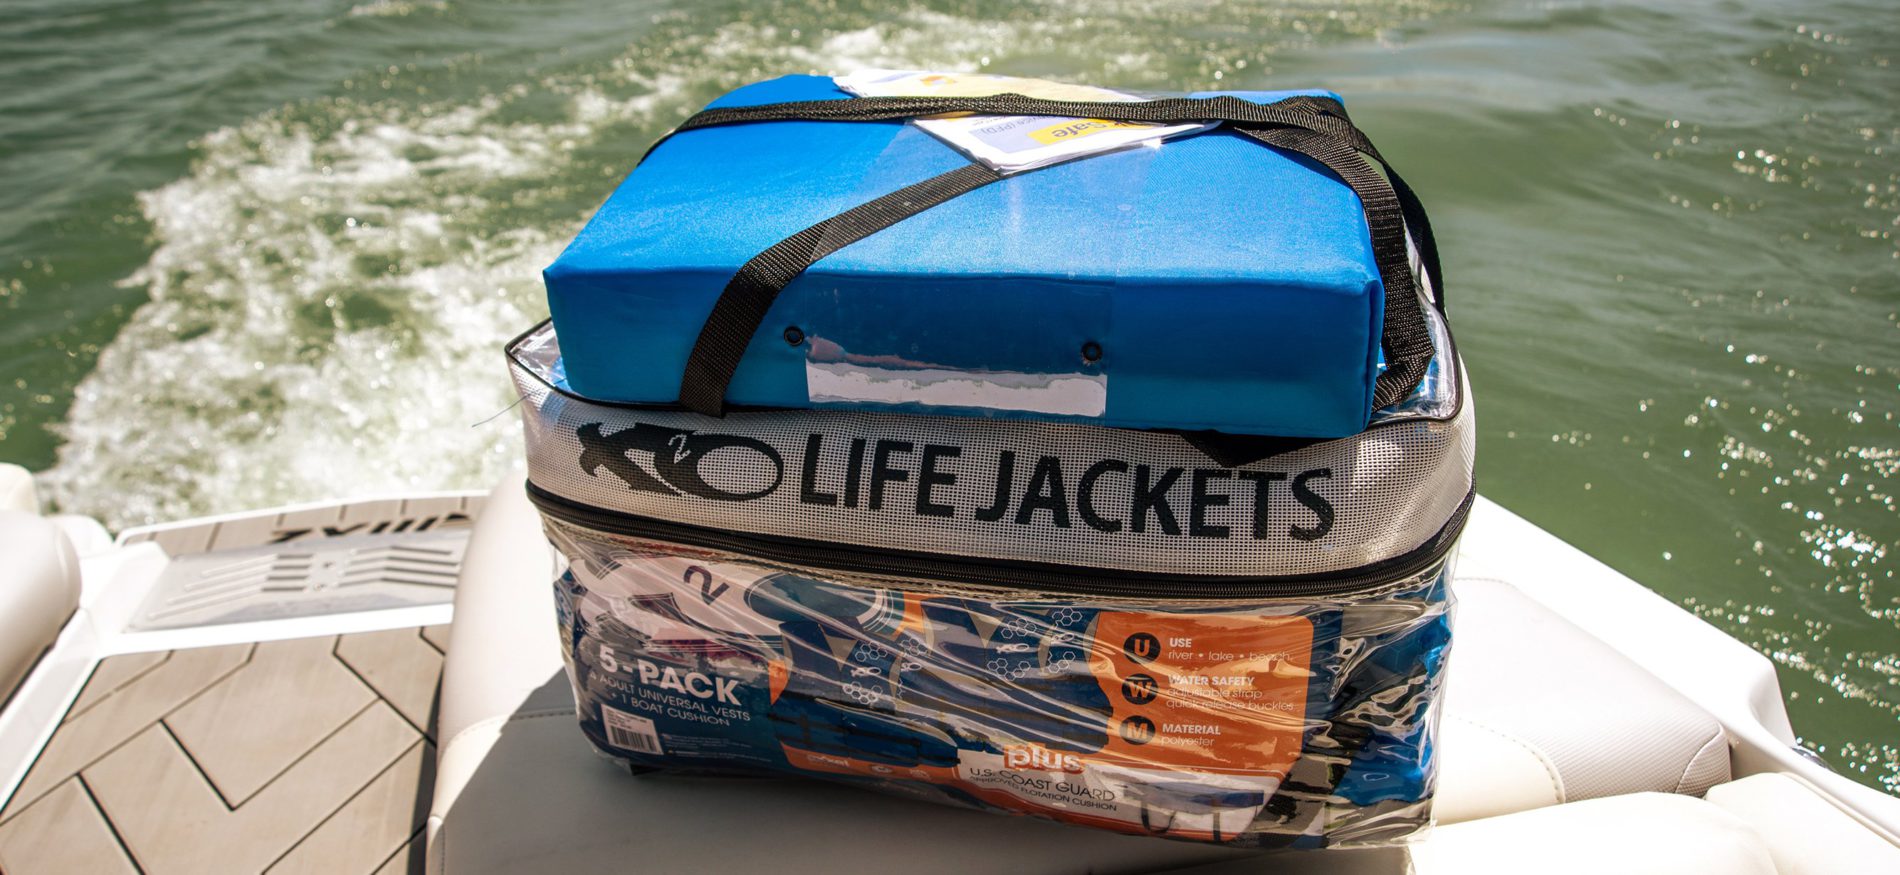 X2O life jackets sitting on the back of a boat